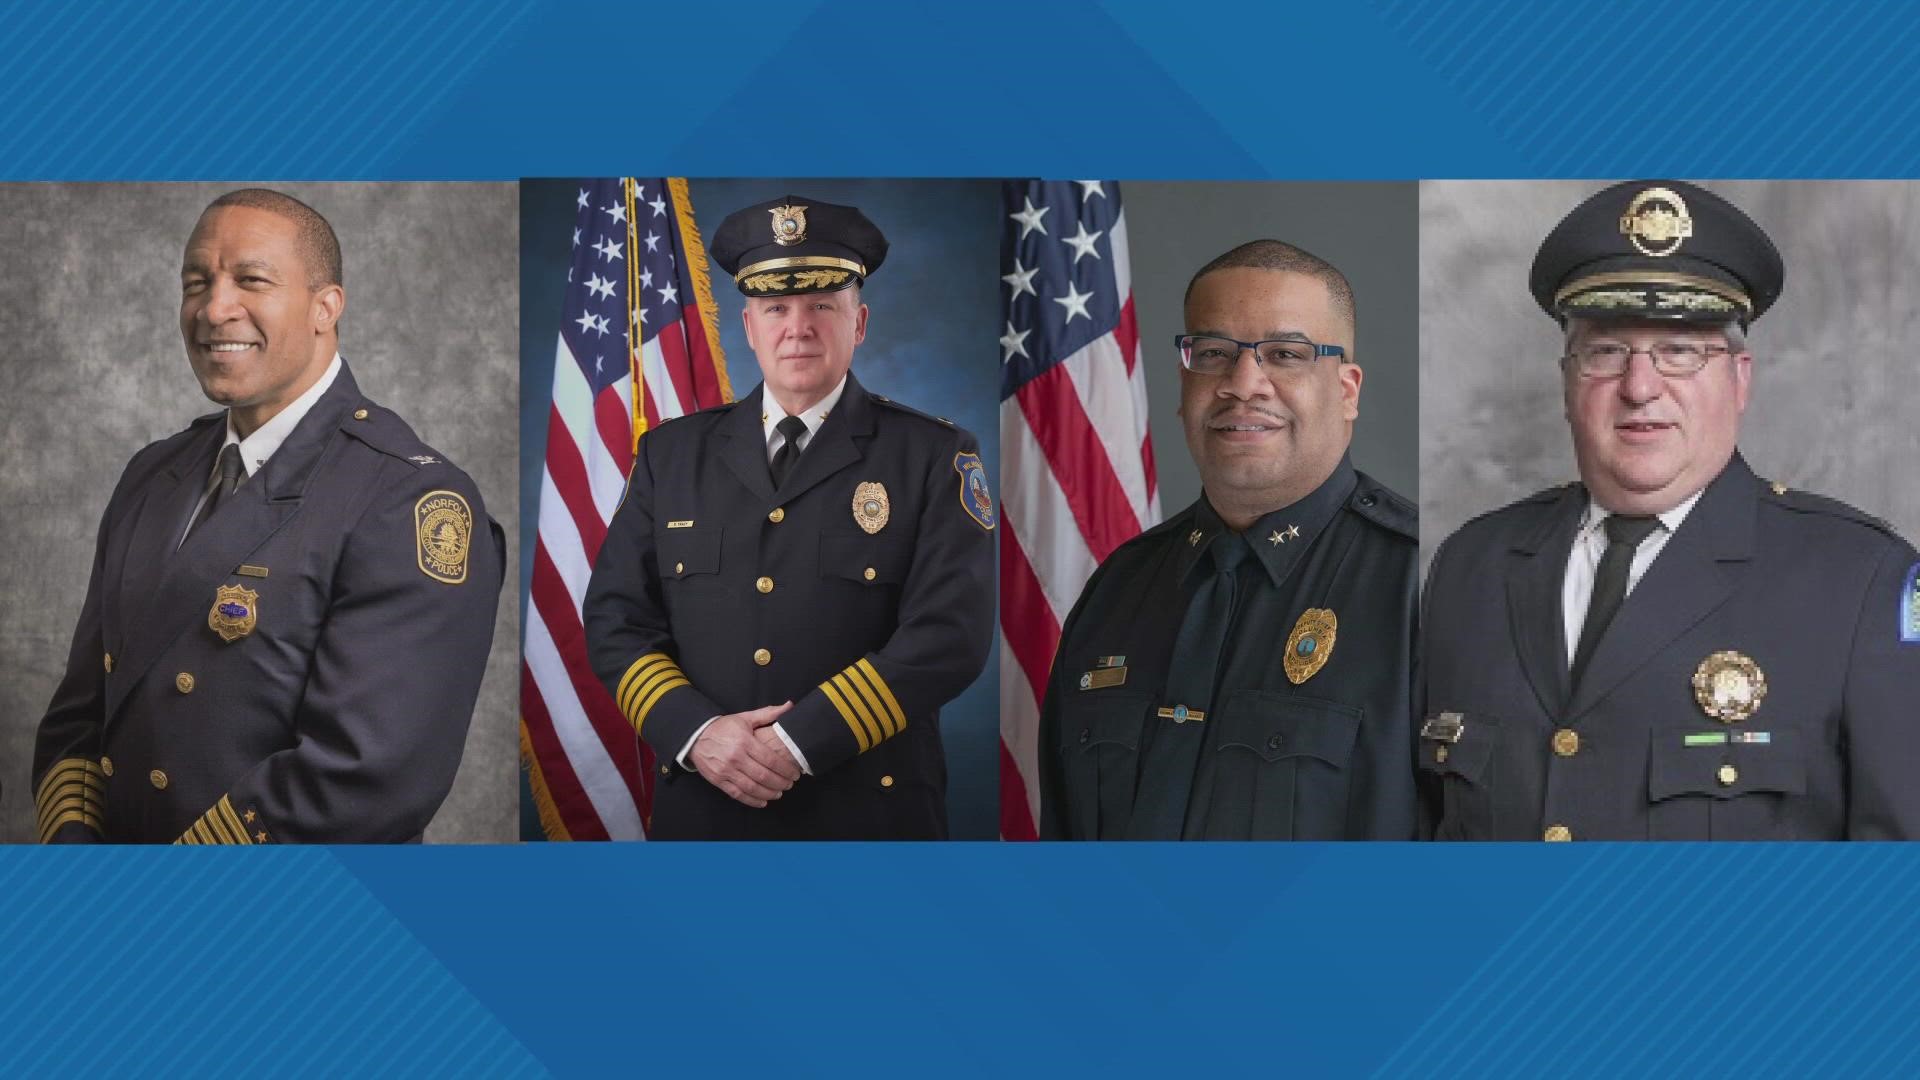 Four men are finalists to lead the department, including the current interim chief, Michael Sack.